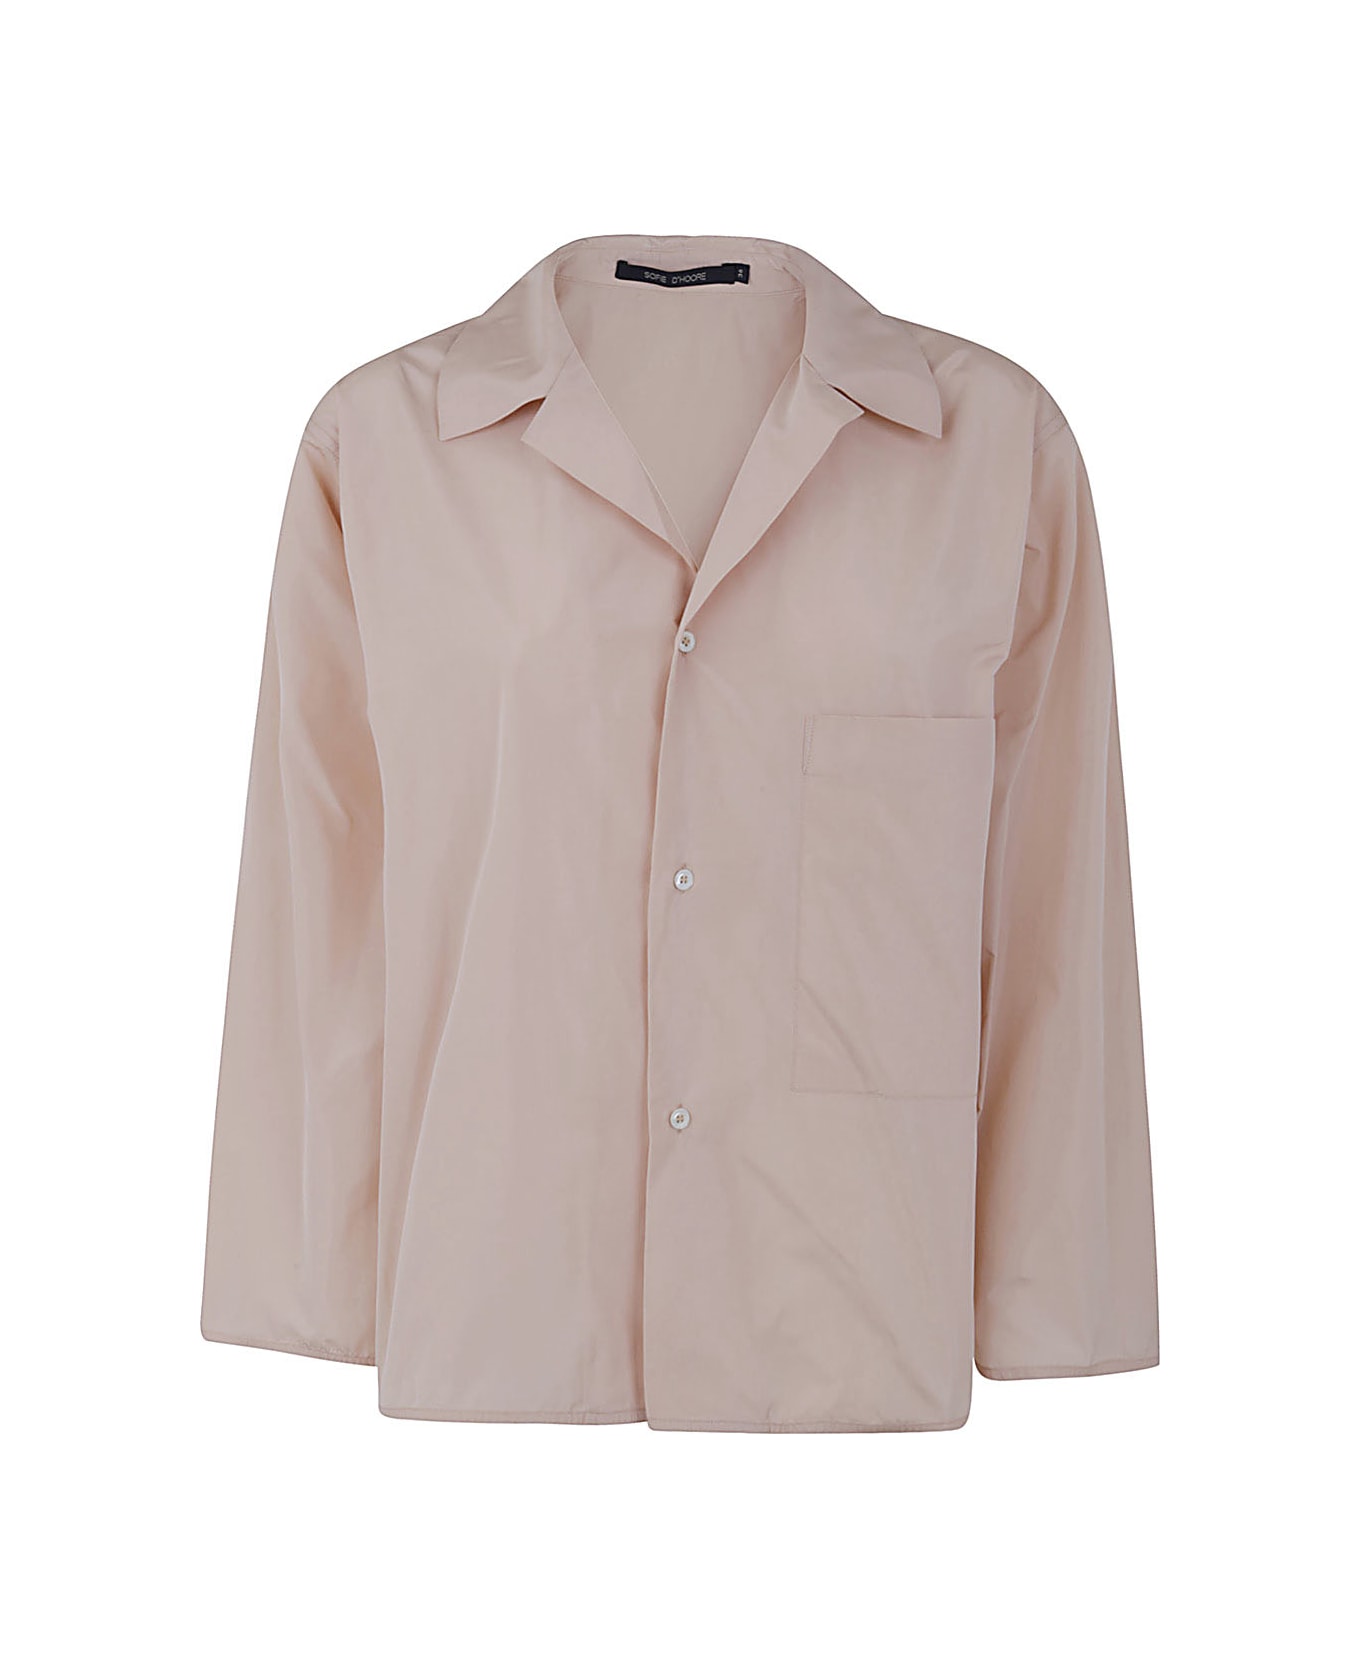 Sofie d'Hoore Long Sleeve Shirt With Front Applied Pocket - Nude